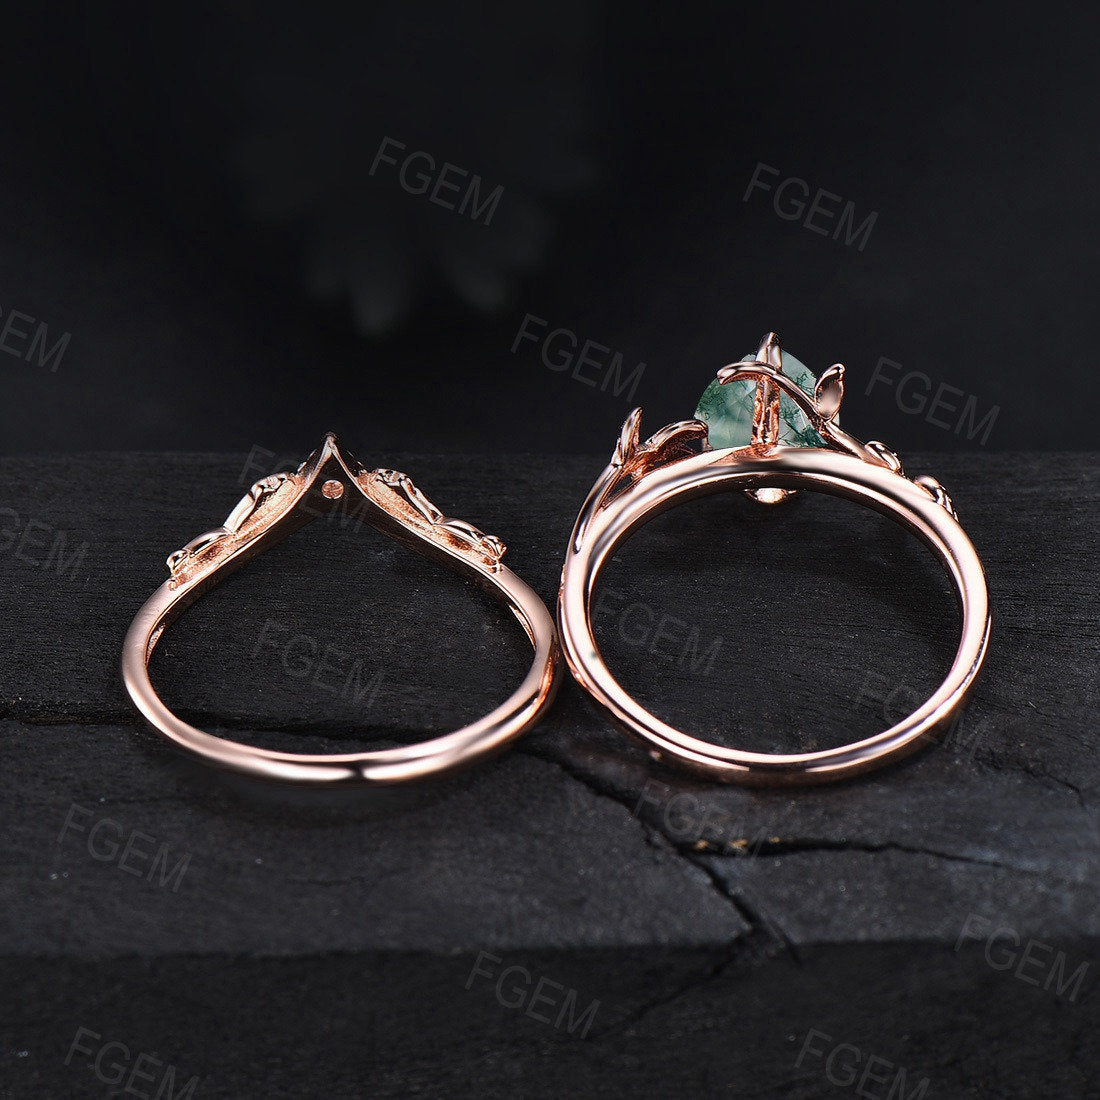 Nature Inspired Engagement Rings Sets 14K Rose Gold Pear Shaped Natural Moss Agate Leaf Wedding Ring Unique Solitaire Rings Anniversary Gift